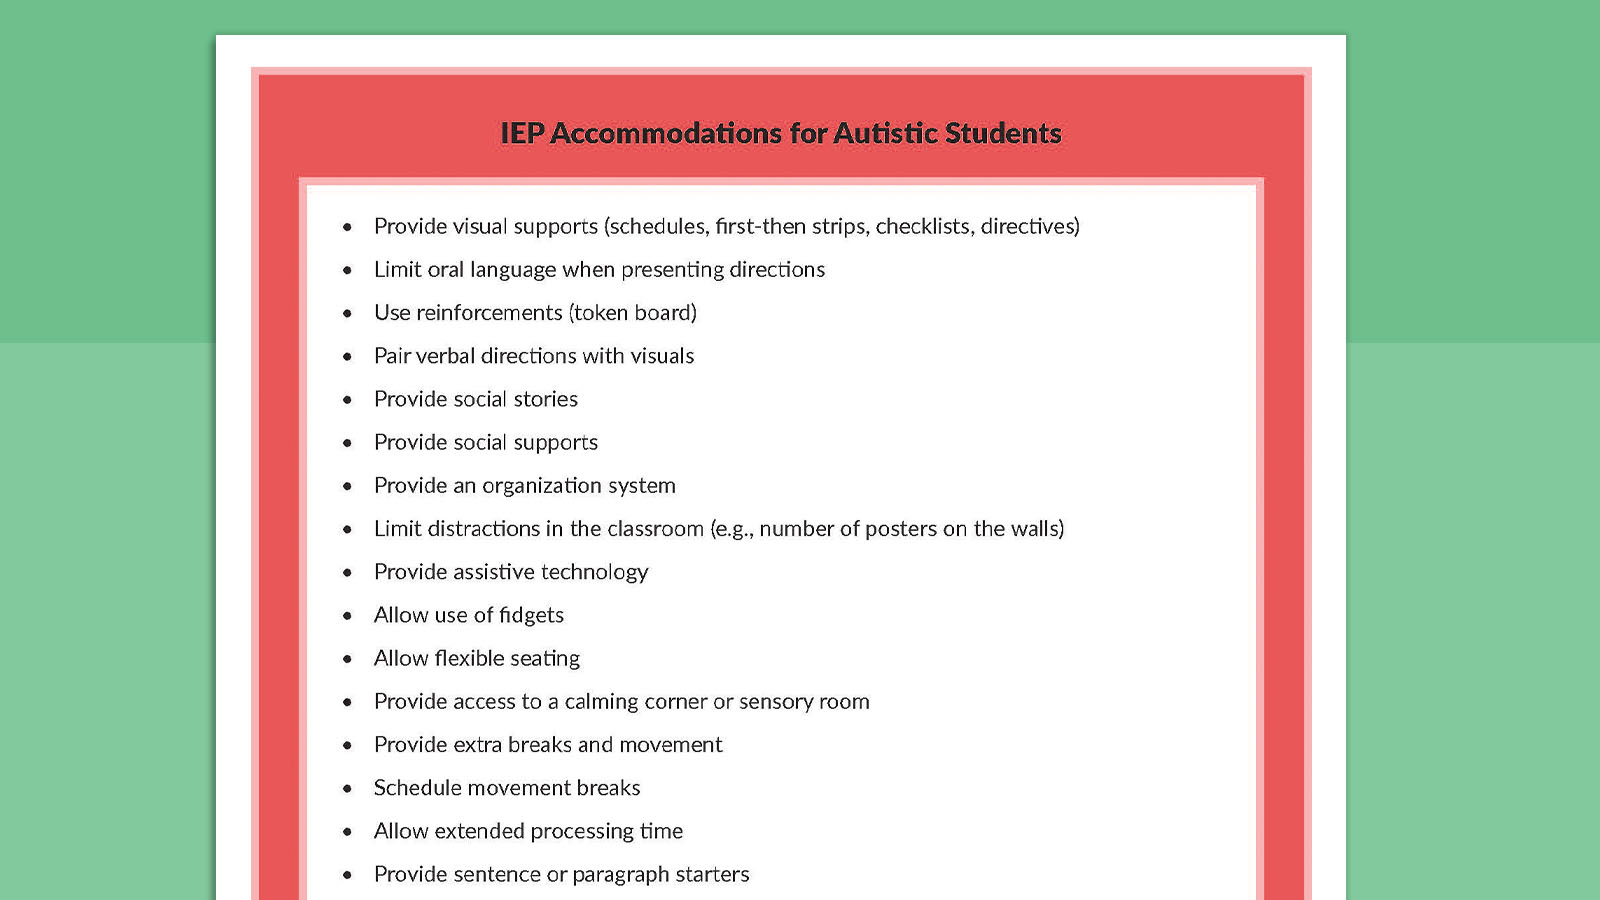 Printable sheet listing IEP accommodations for autistic students.